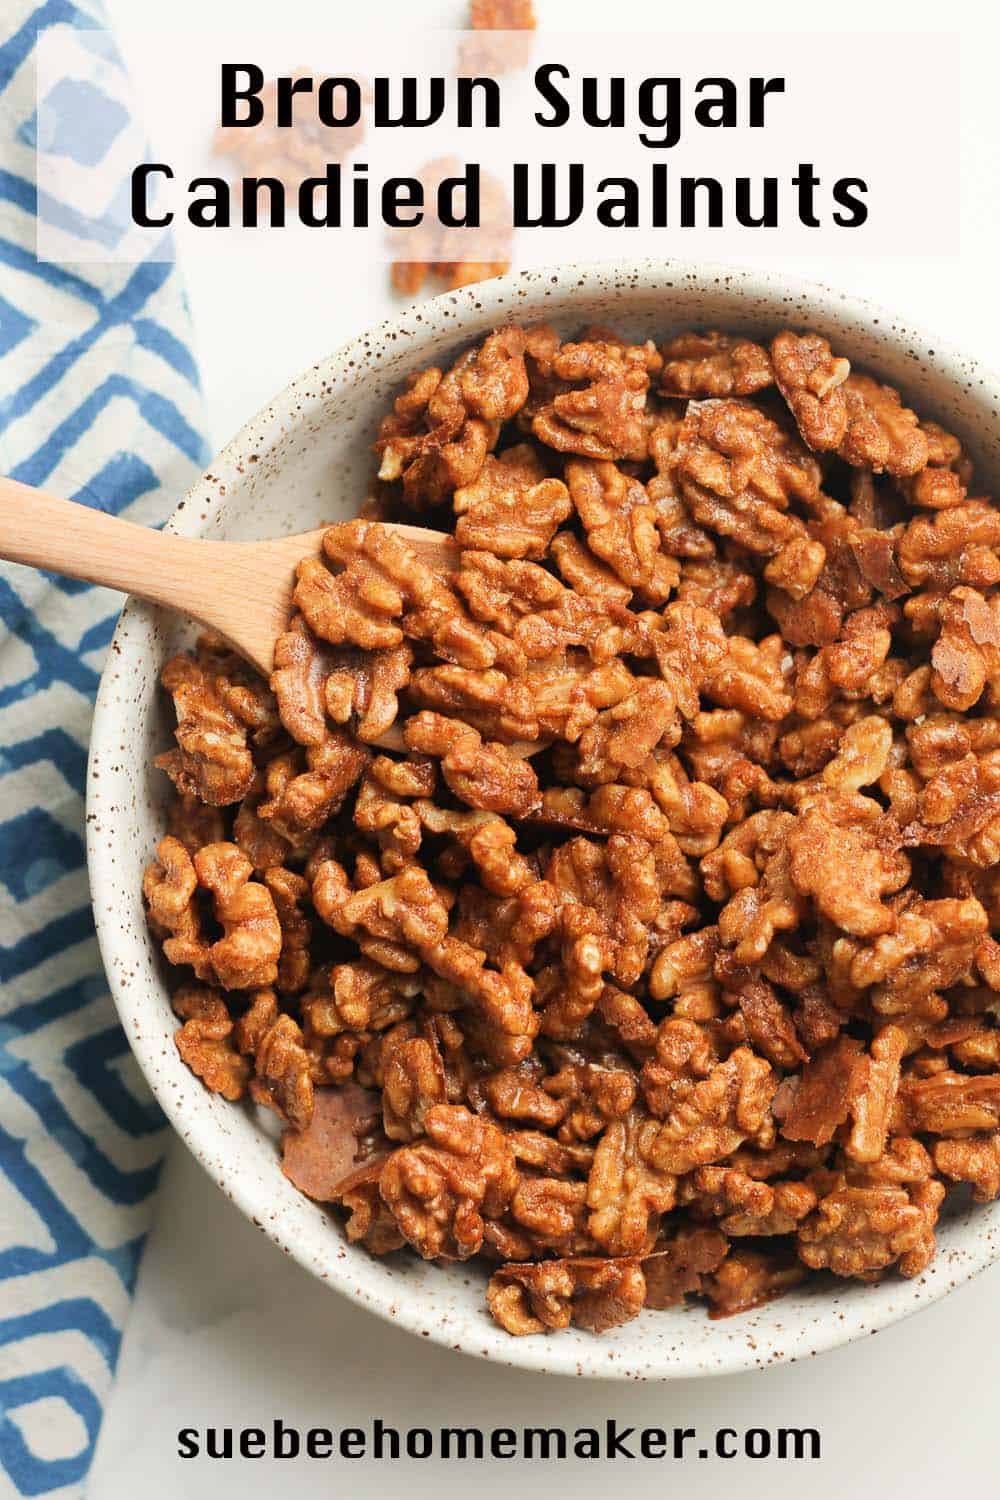 A bowl of candied walnuts with a spoon.